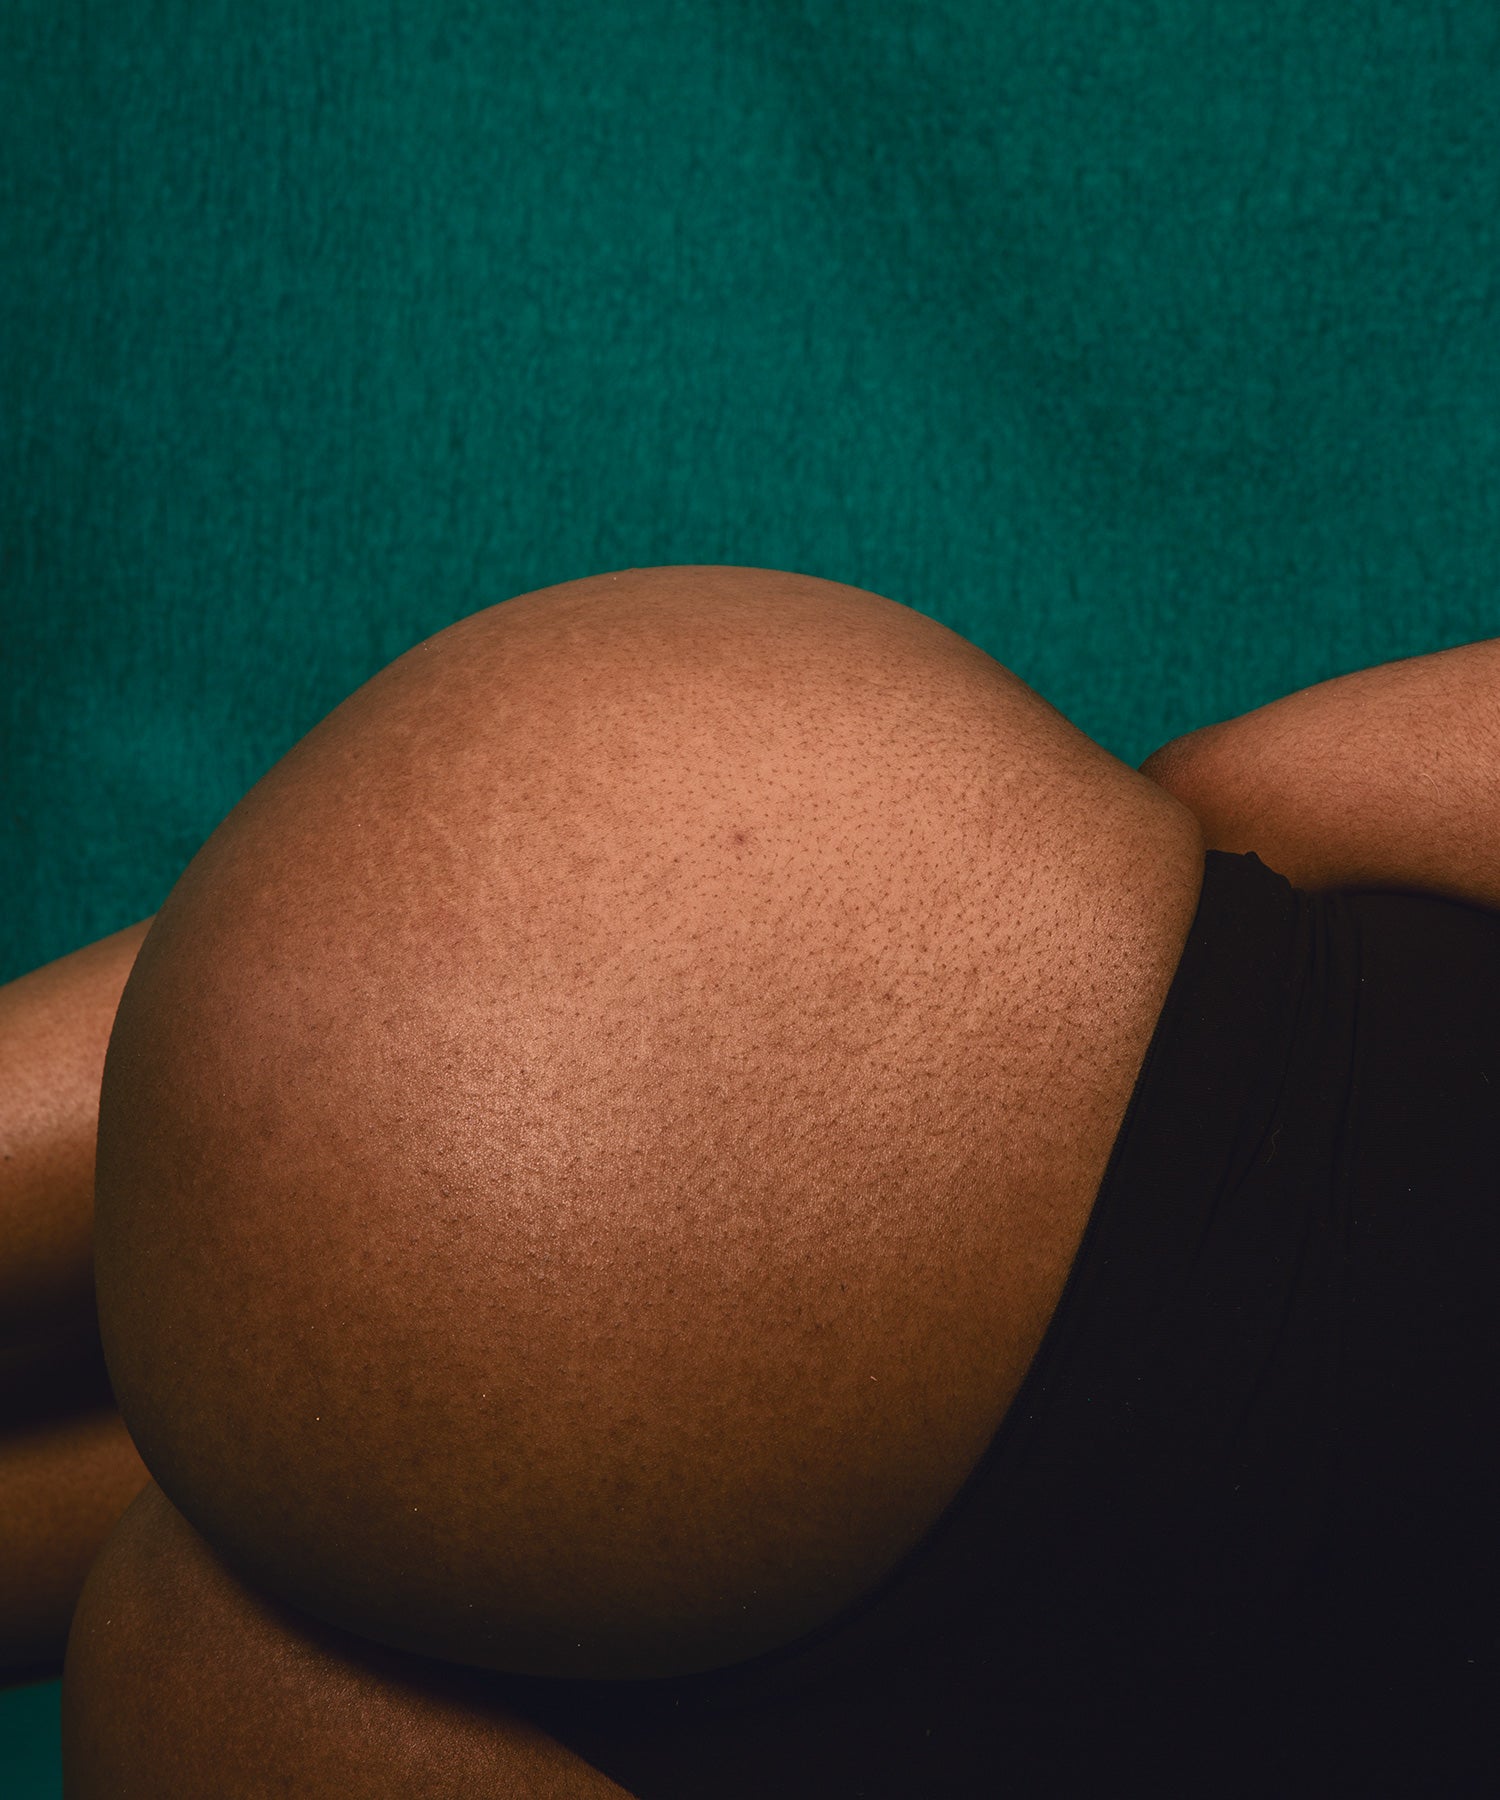 christian zieger share black girls with butts photos